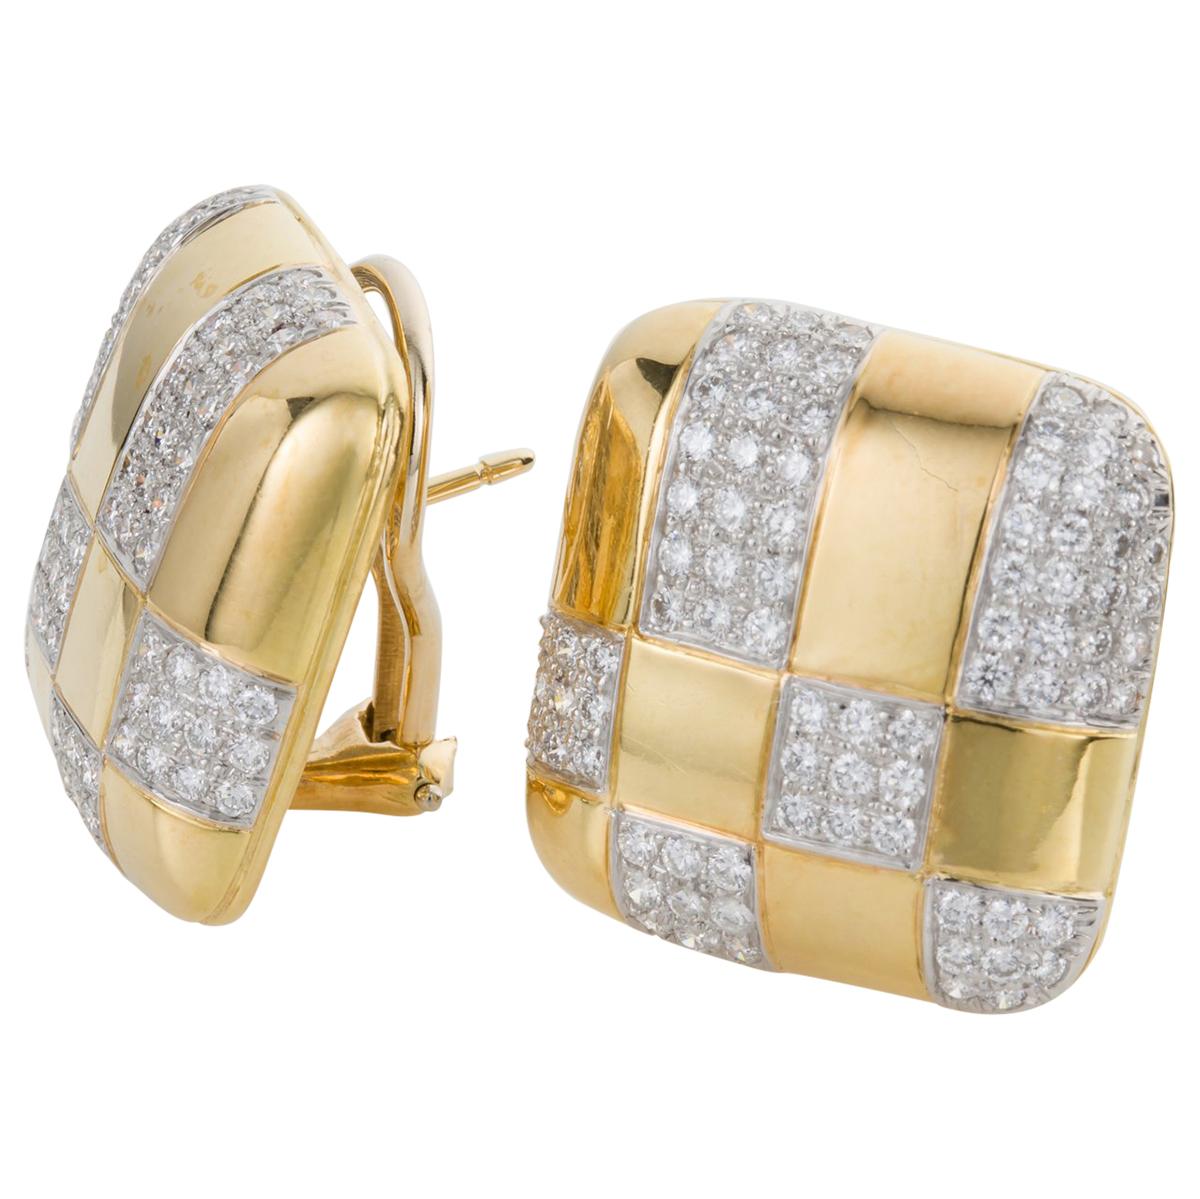 Stylish and sophisticated, Tiffany & Co 18k yellow gold, platinum and diamond earrings work so well with any outfit. Each of cushion shaped yellow gold outline, enhanced by a diamond set woven pattern with yellow gold and platinum, showcasing 166